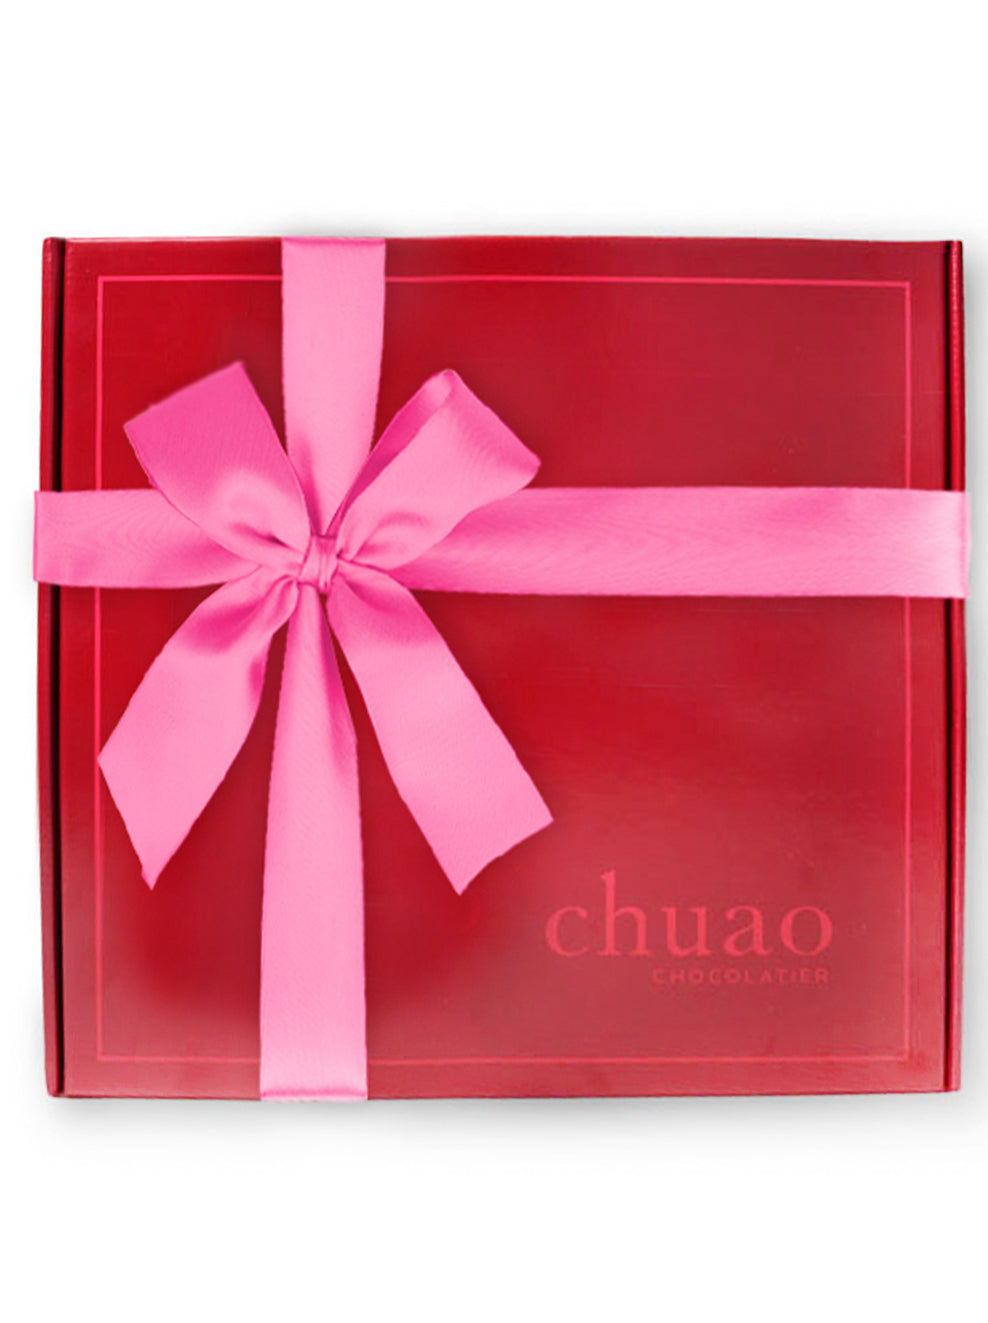 Large red chuao gift box with a pink bow